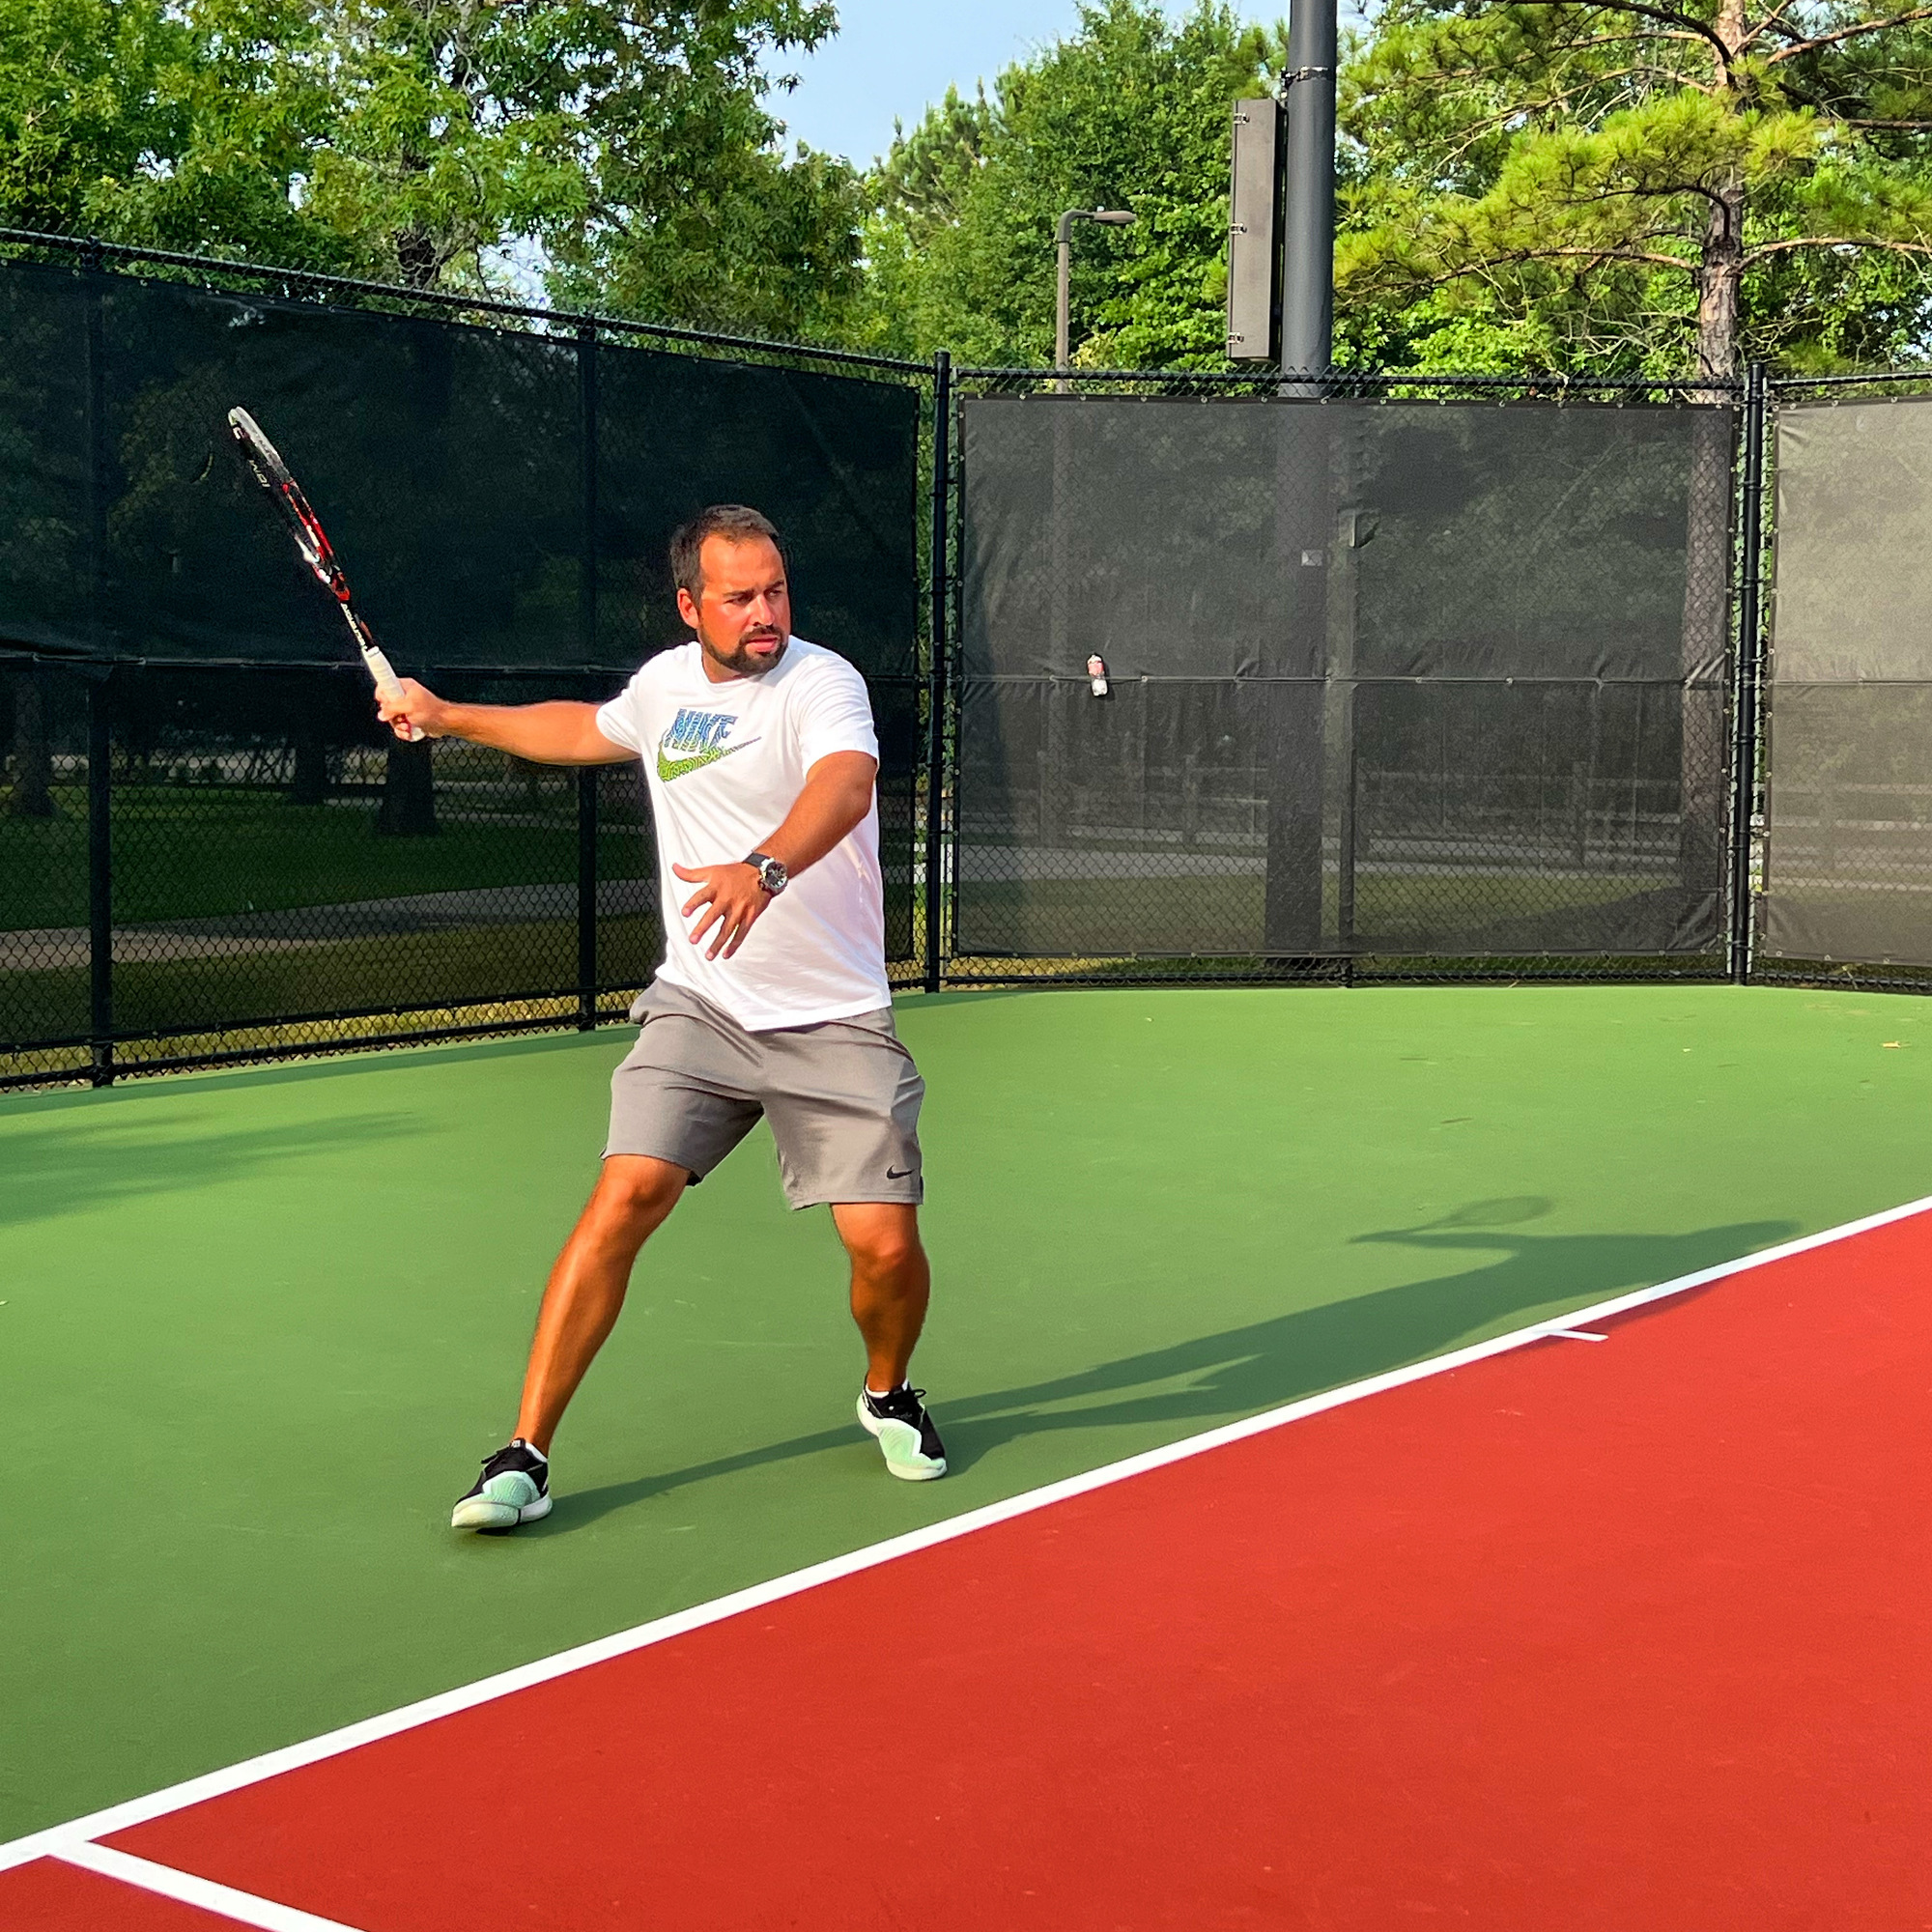 Aelxey I. teaches tennis lessons in Sunny Isles, FL